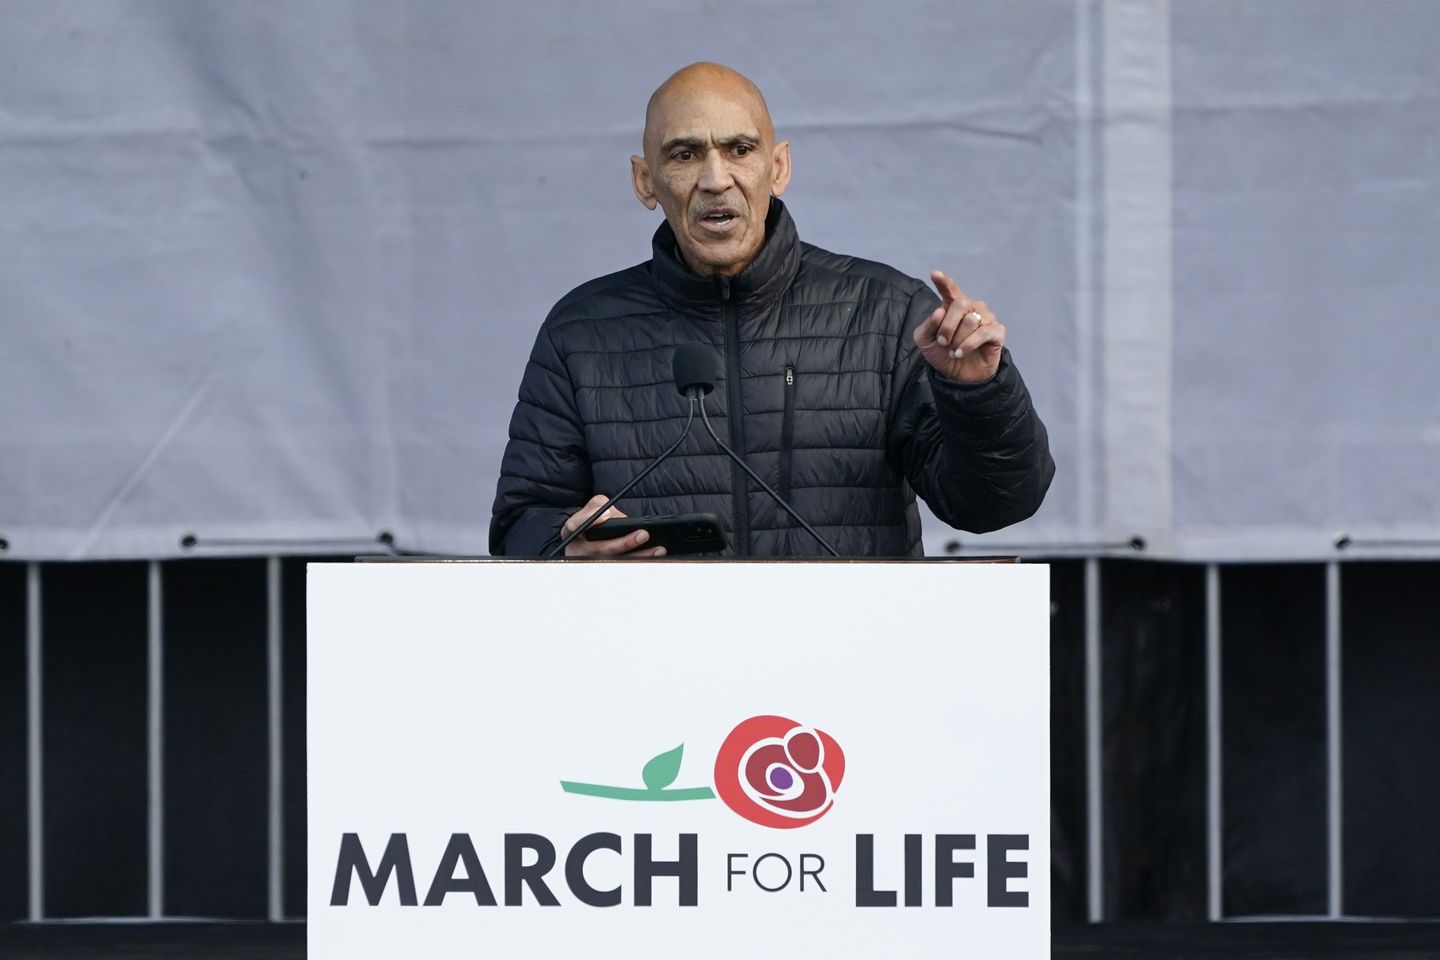 Ted Cruz defends Tony Dungy as 'hero' amid media onslaught